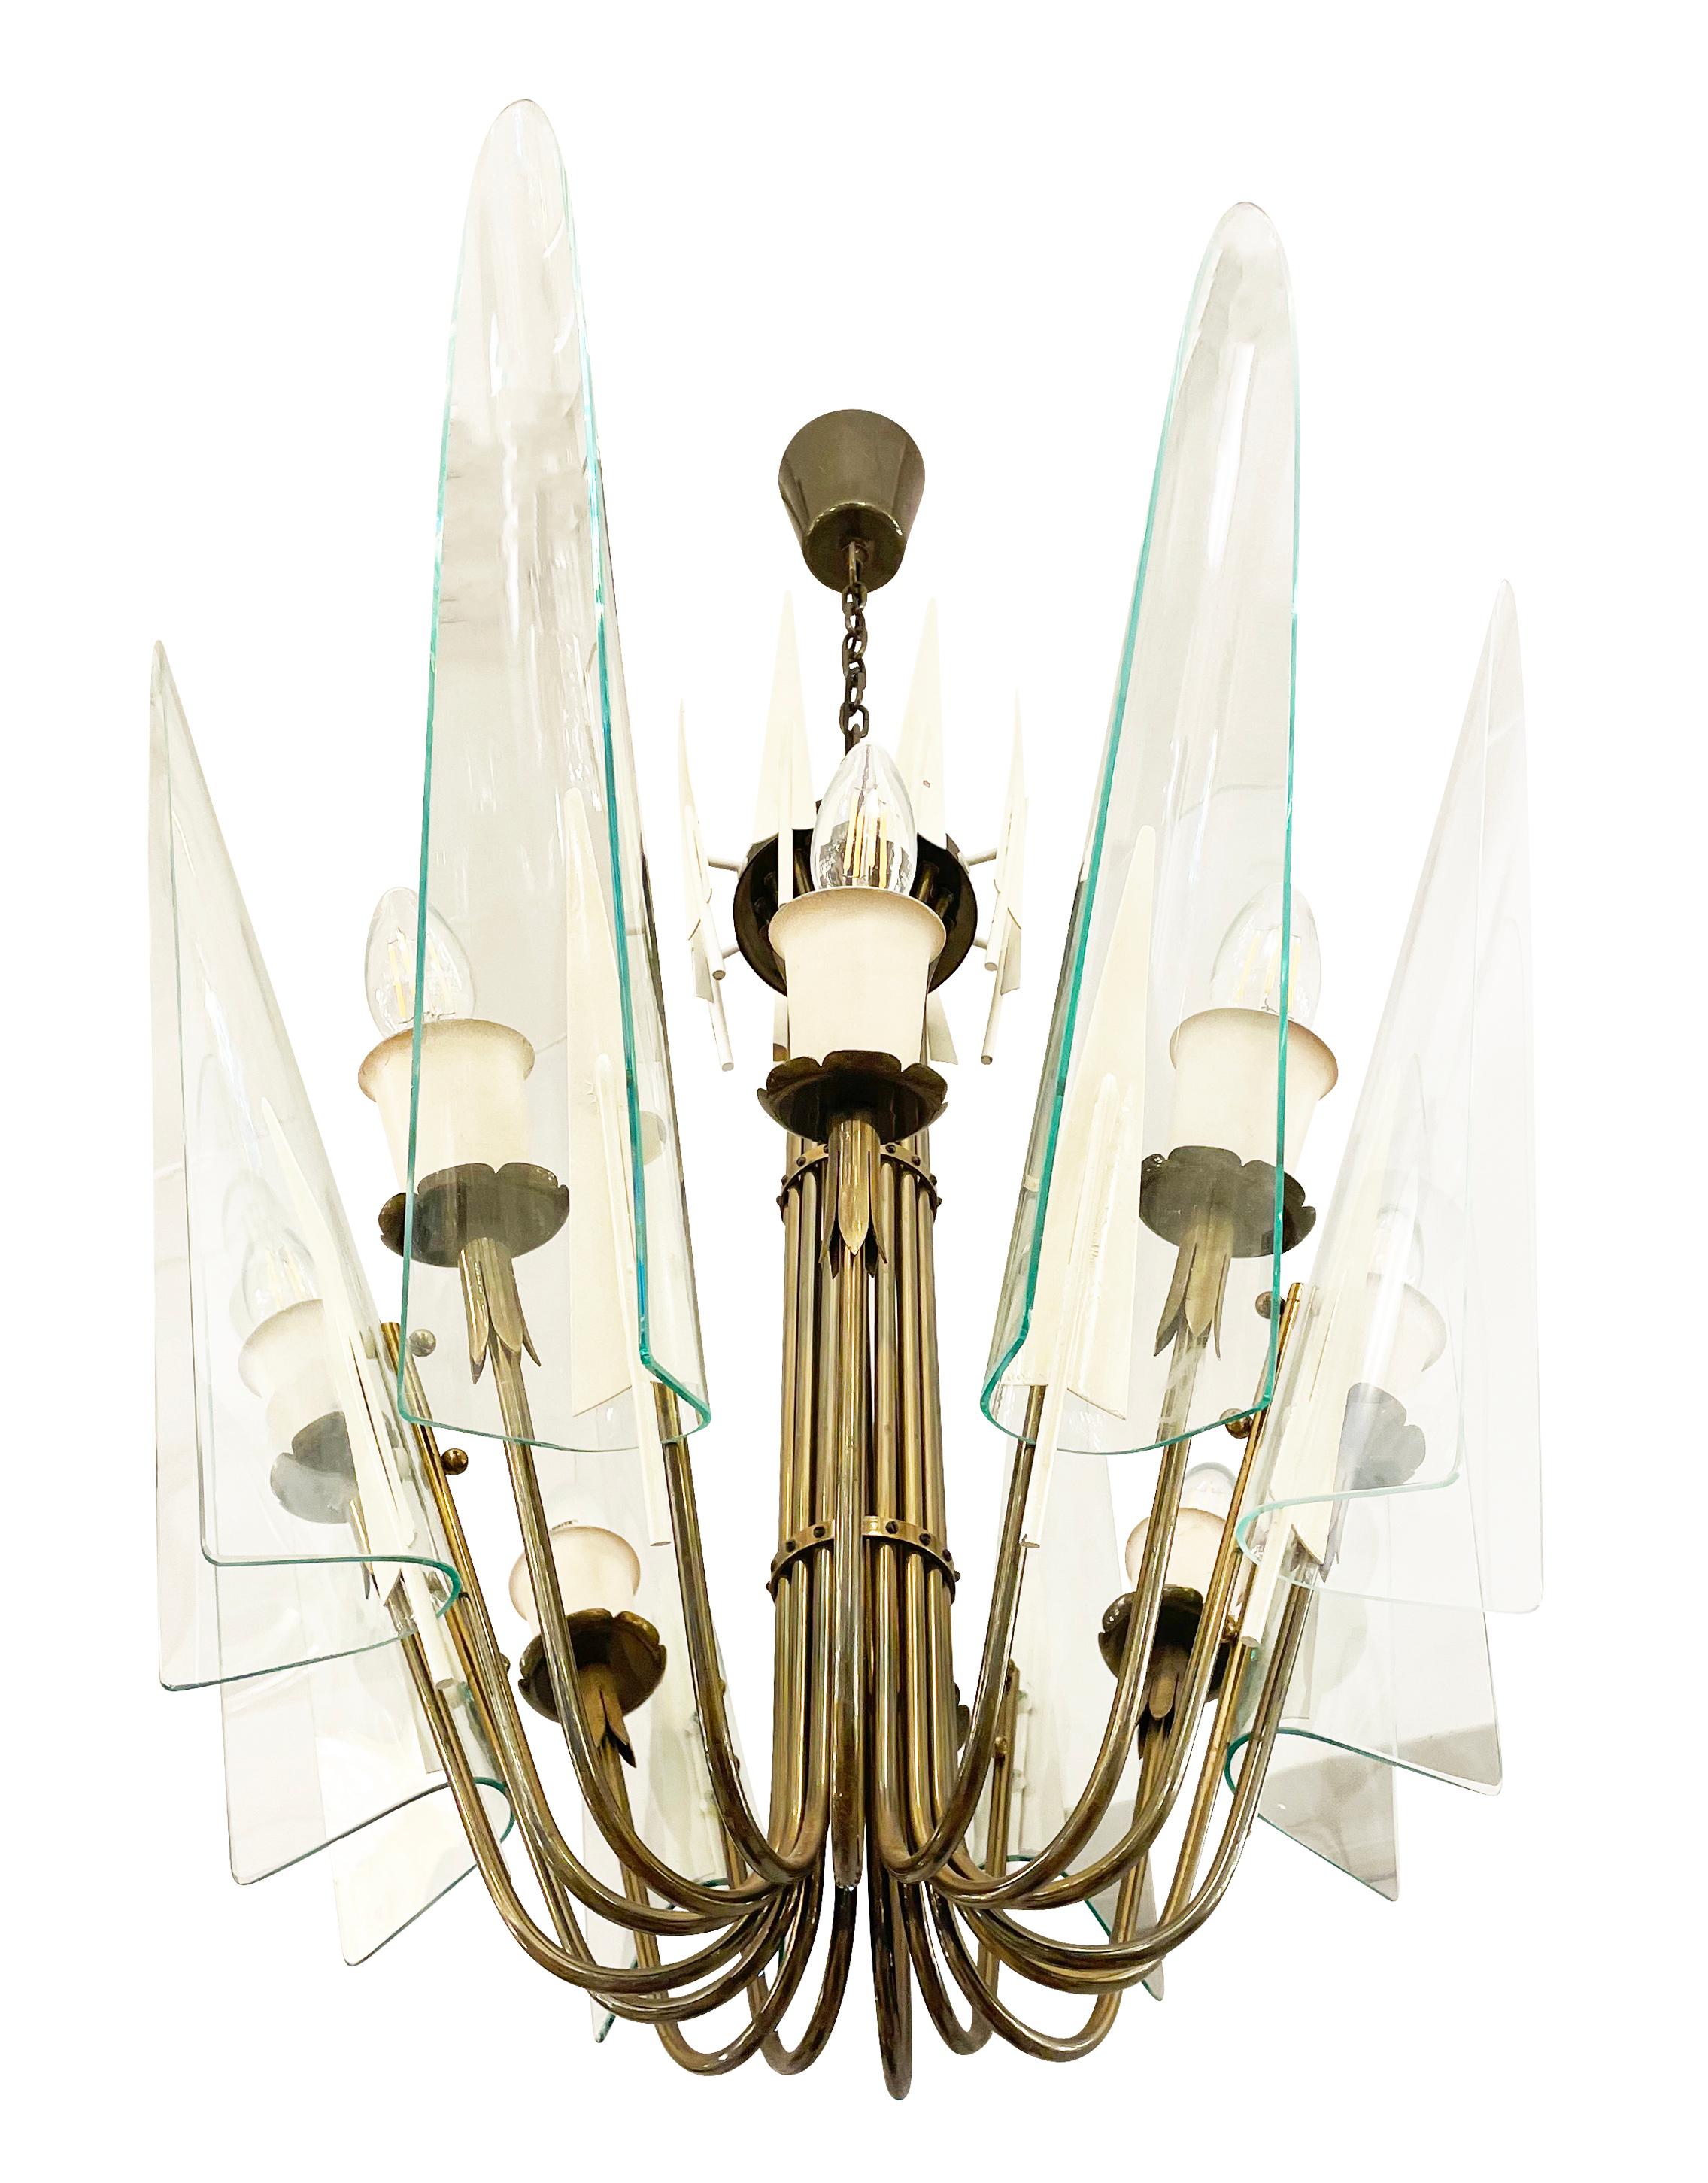 Large Italian mid-century chandelier attributed to Pietro Chiesa for Fontana Arte. The attribution is given based on the many floral inspired details and the clear glass petals which can be seen as precursors to the glass leaves found on Max